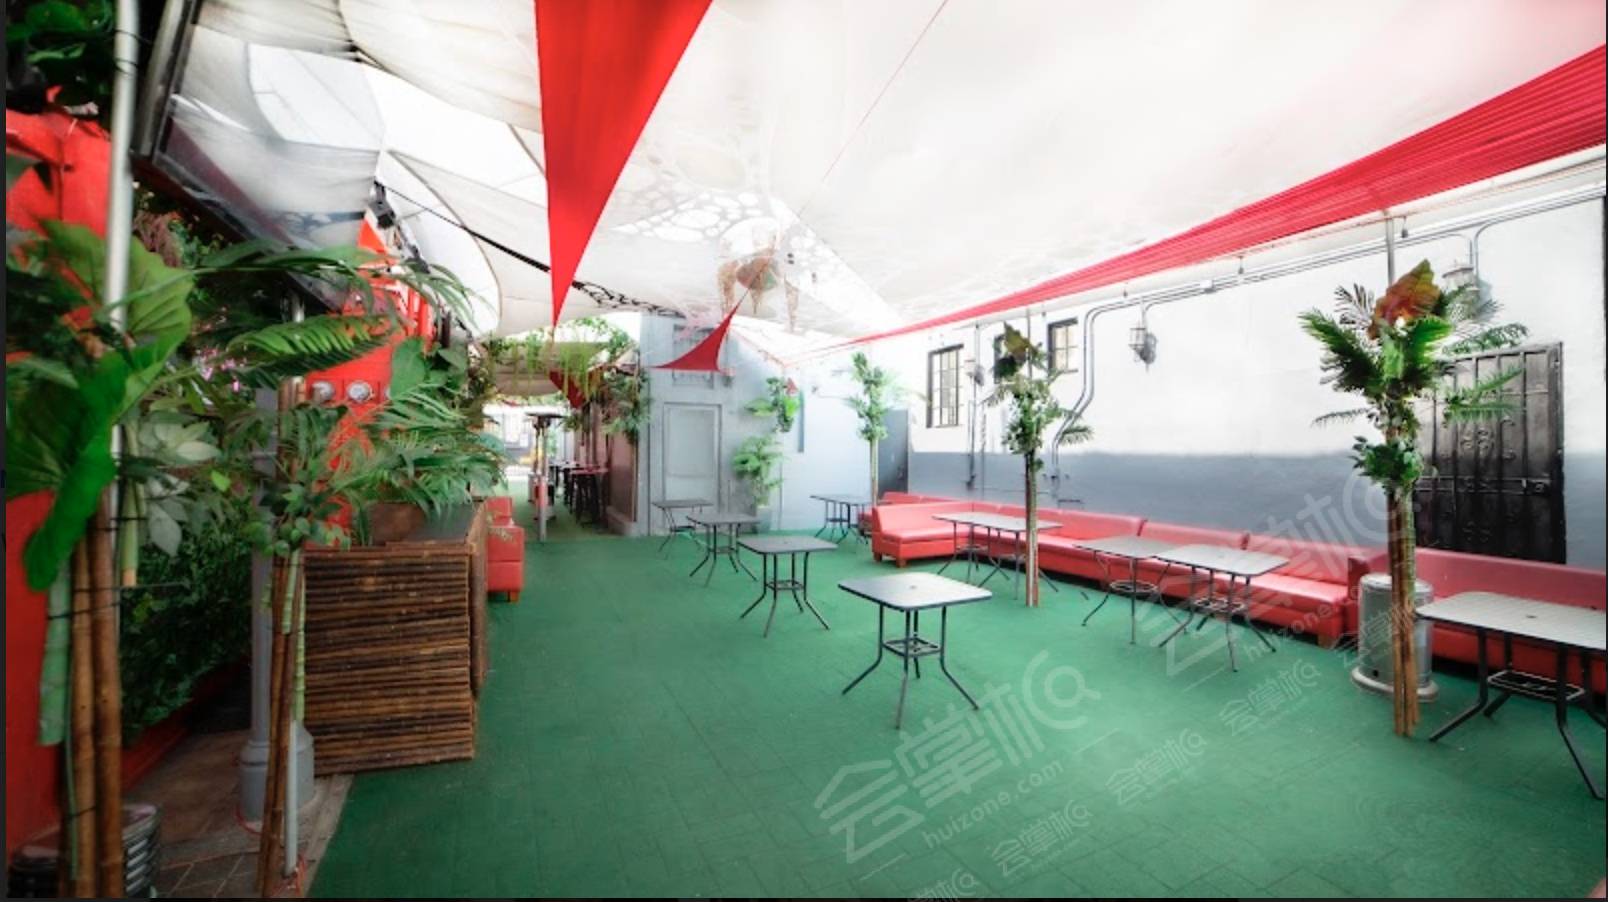 Station1640: Indoor/Outdoor Modern Venue Space in Hollywood